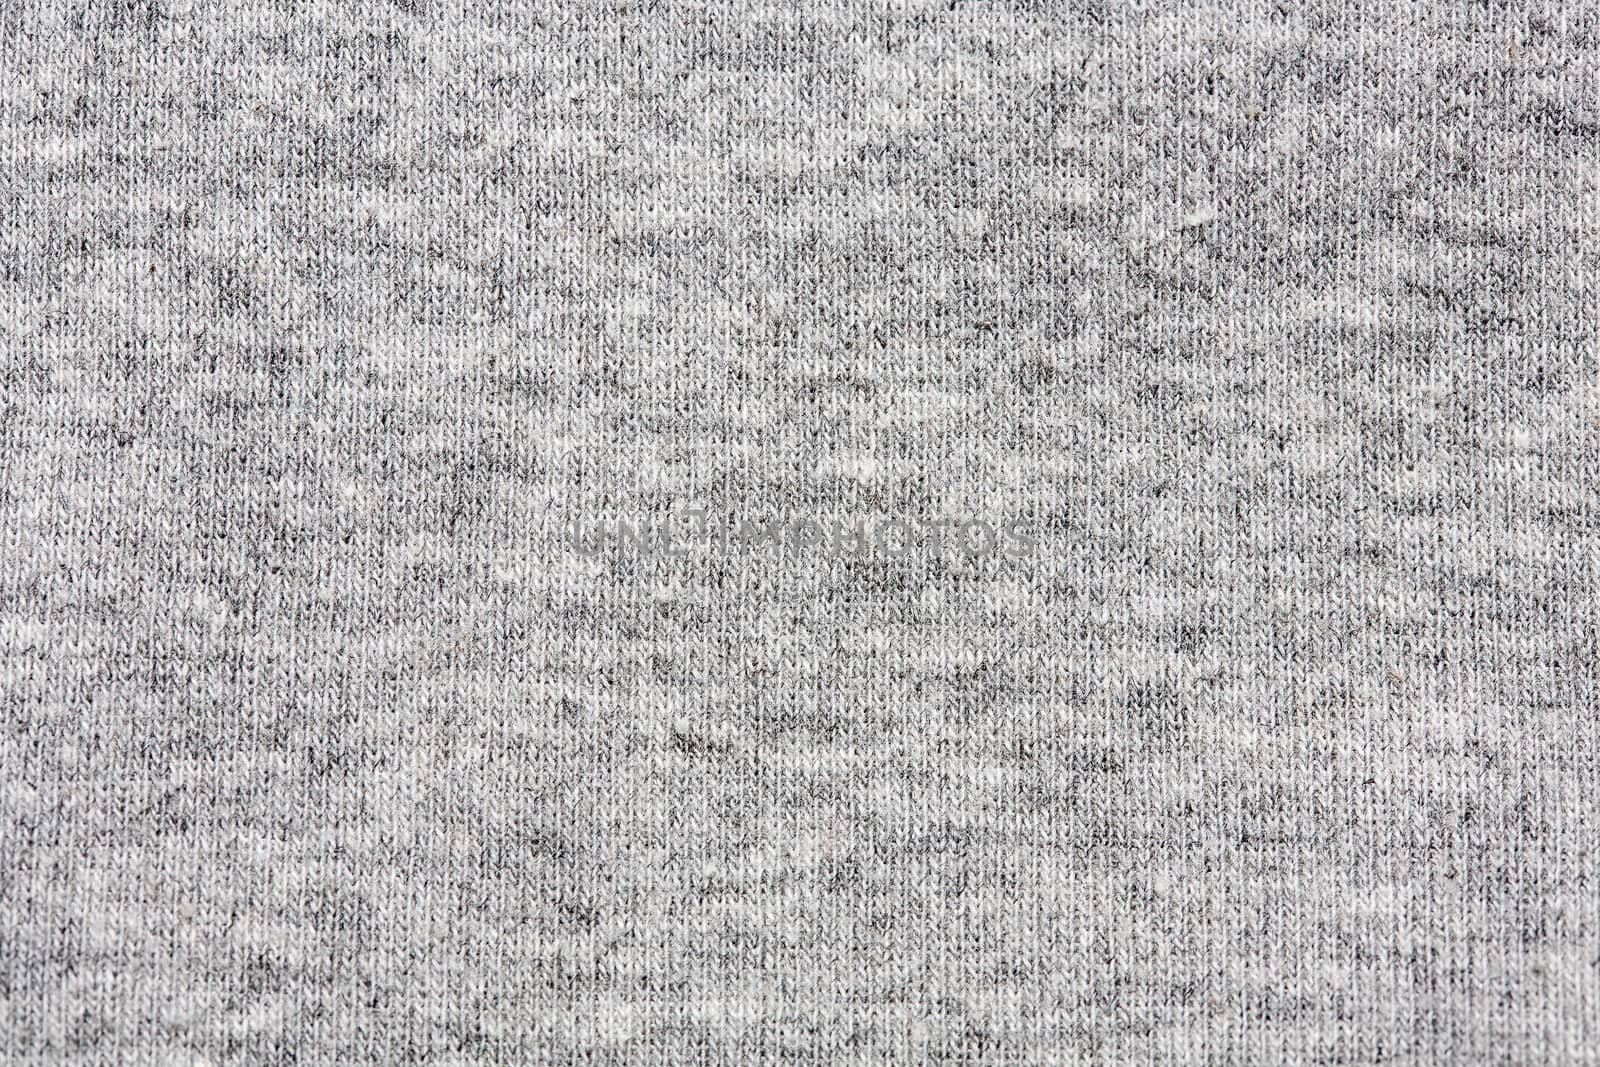 High resolution close up of gray cotton fabric with seams crossing.